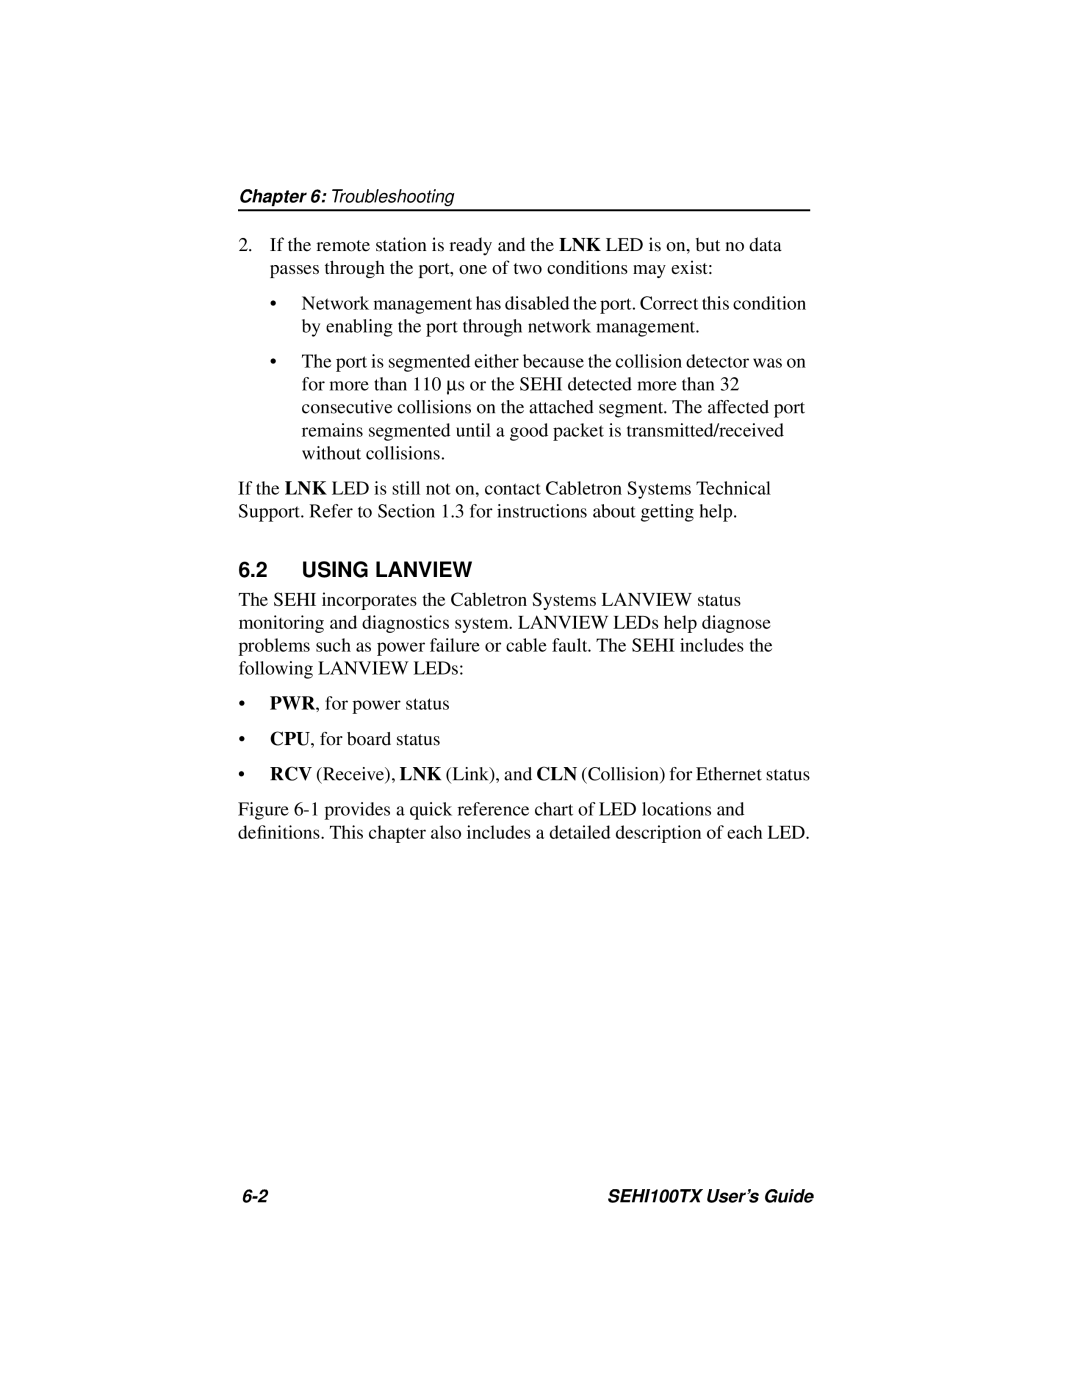 Cabletron Systems SEHI100TX-22 manual Using Lanview 